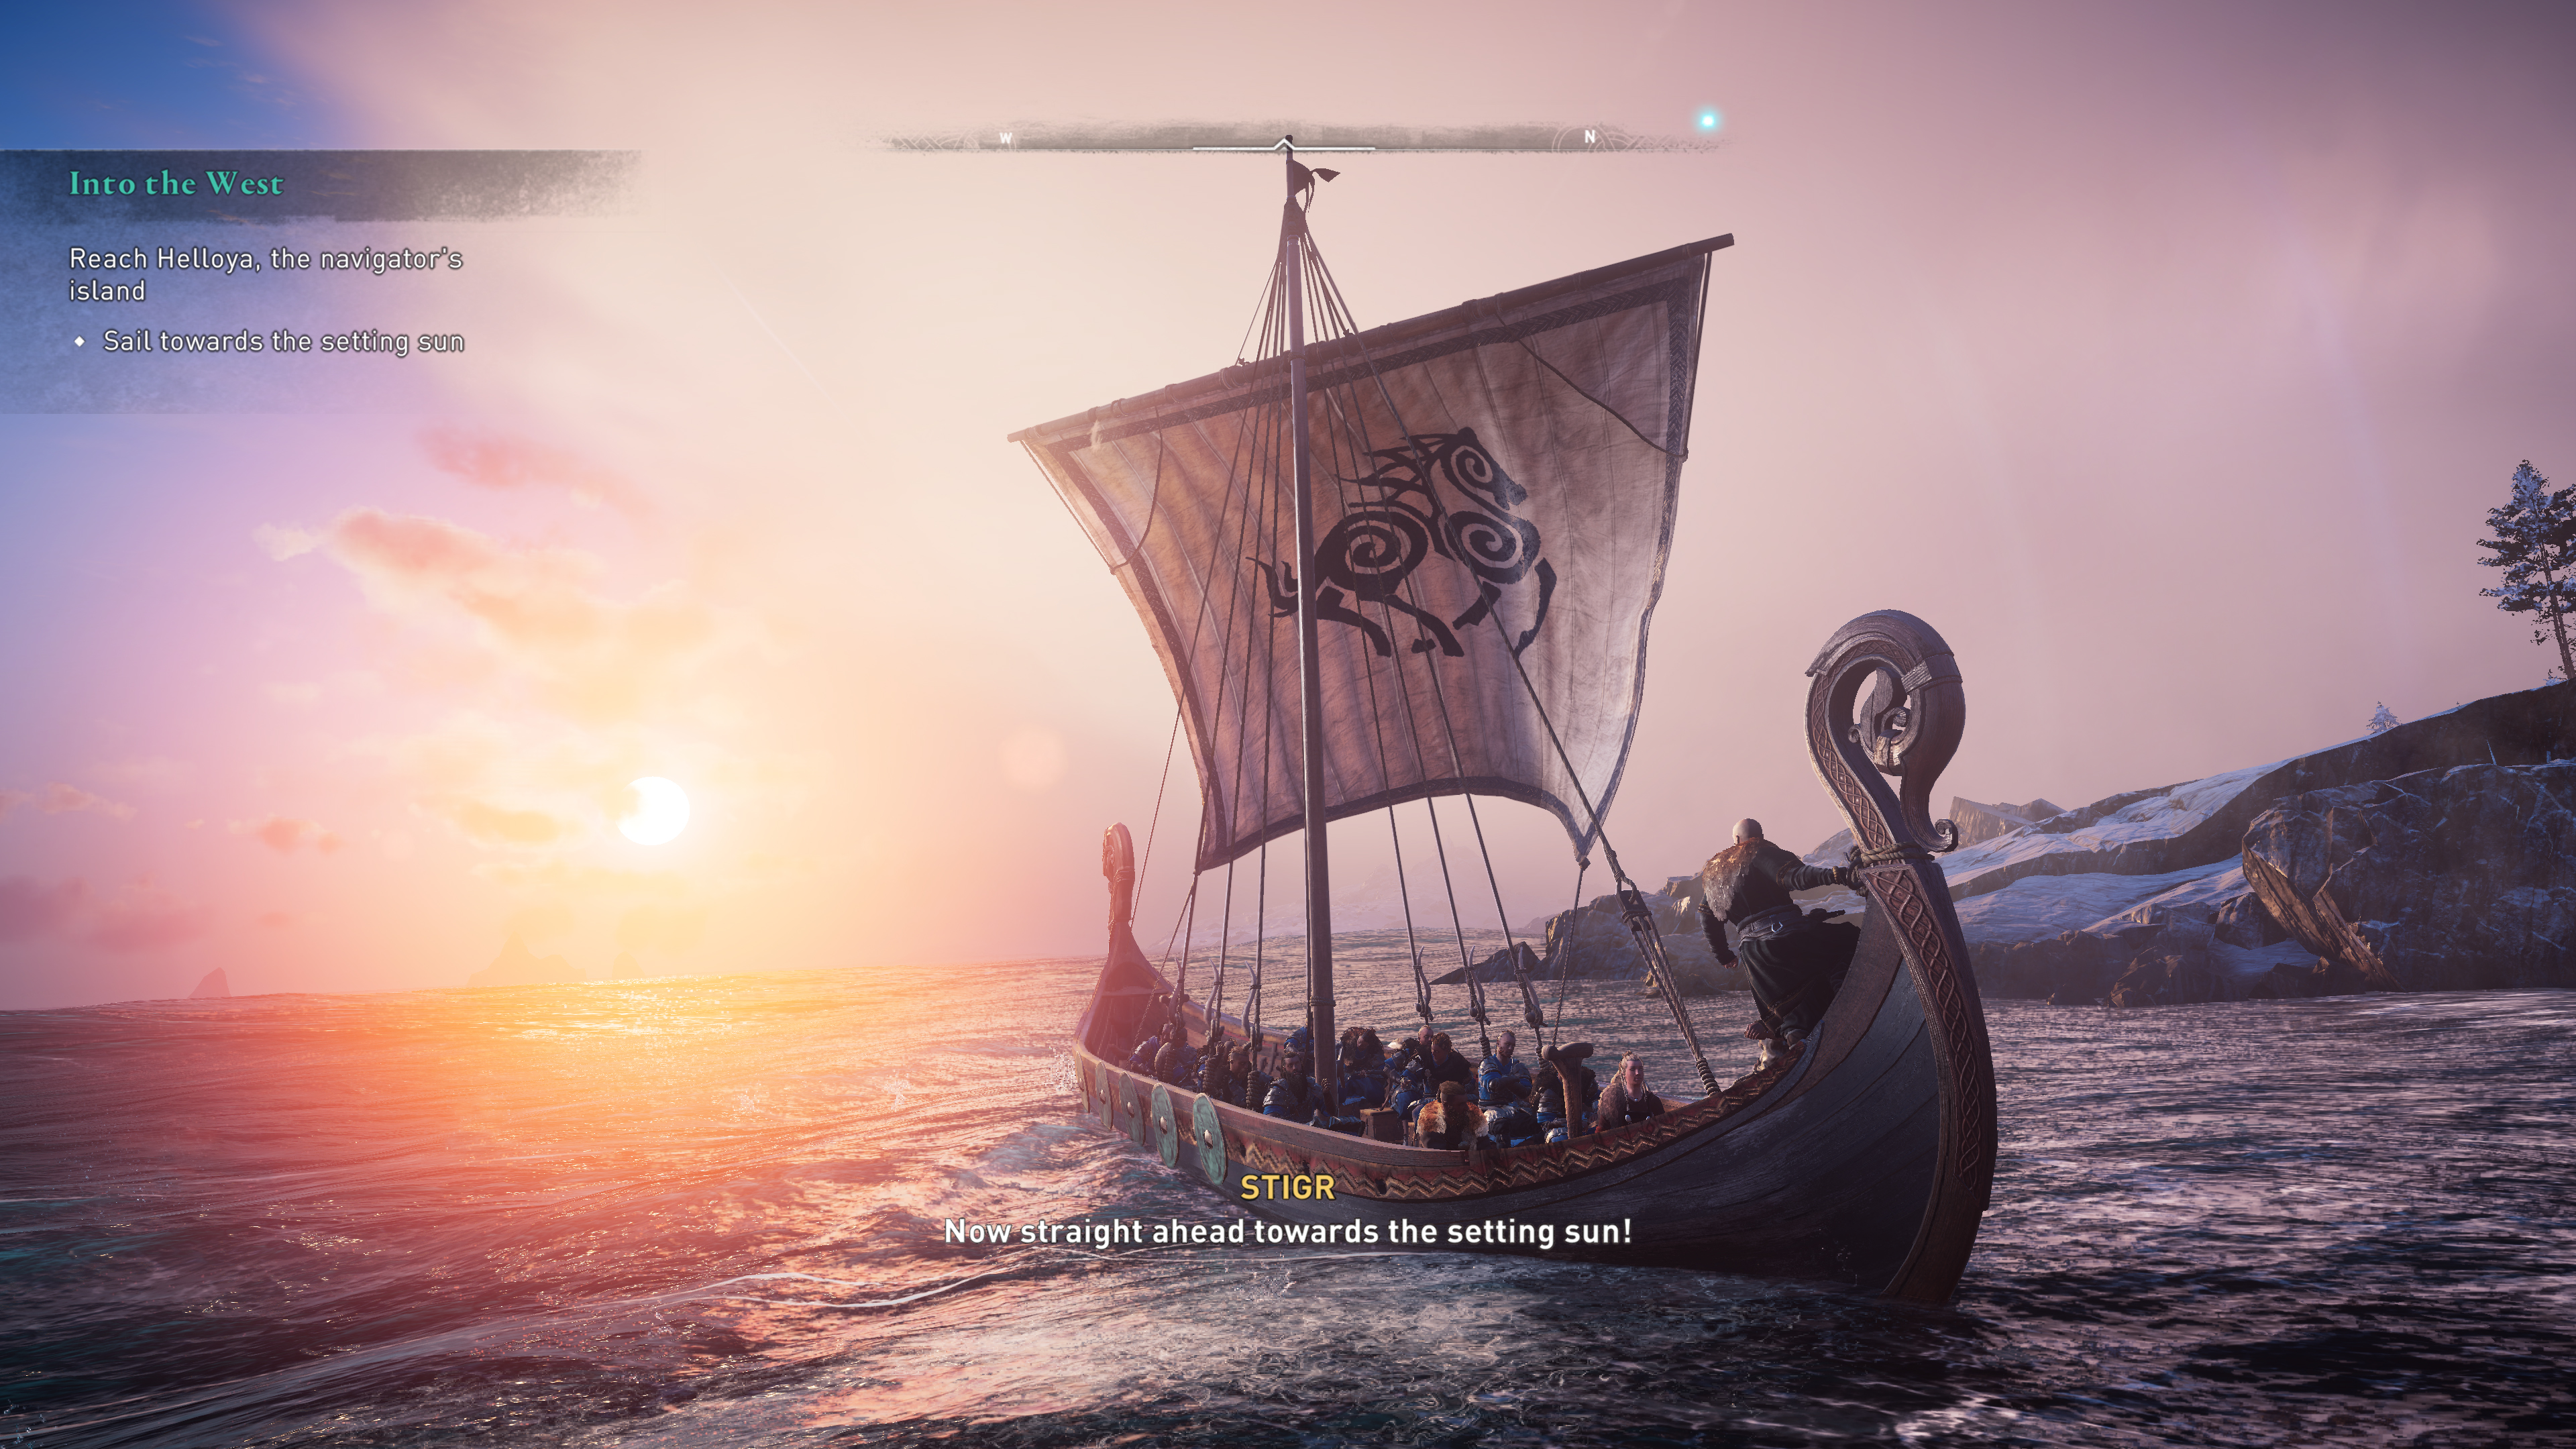 Assassin's Creed: Discovery Tour: Viking Age